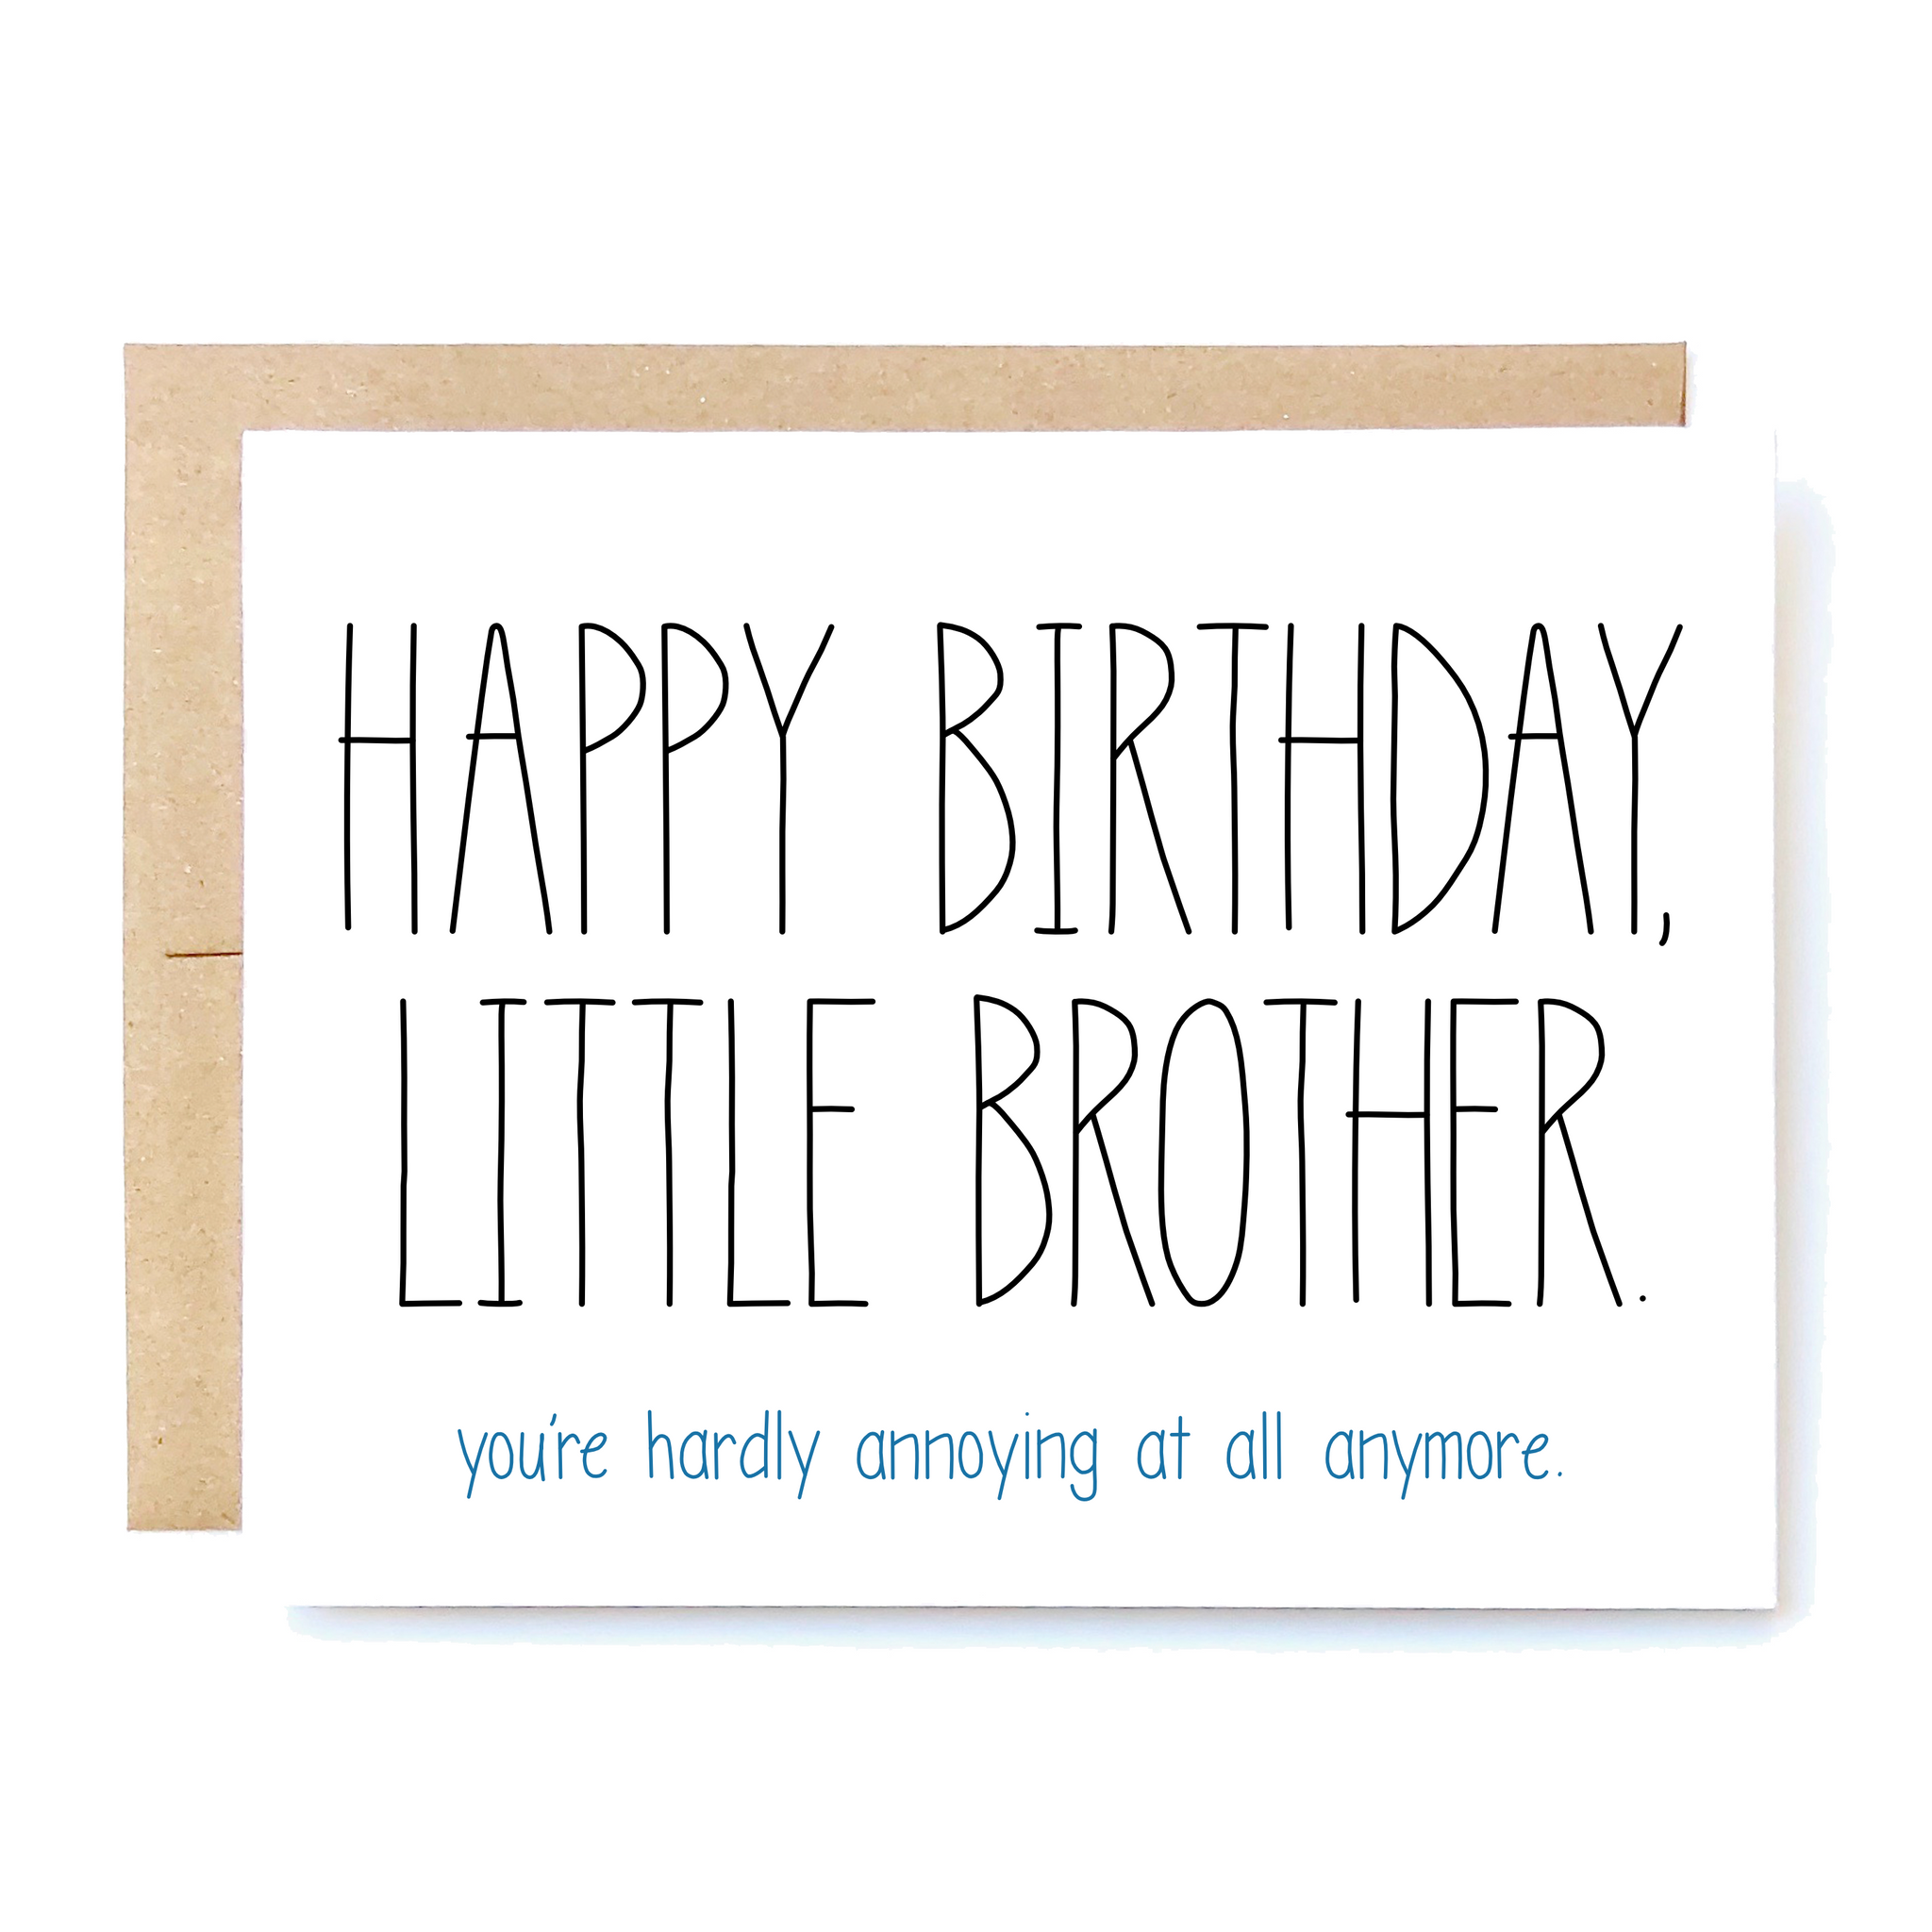 Card Front: Happy birthday, little brother. You're hardly annoying at all anymore. 